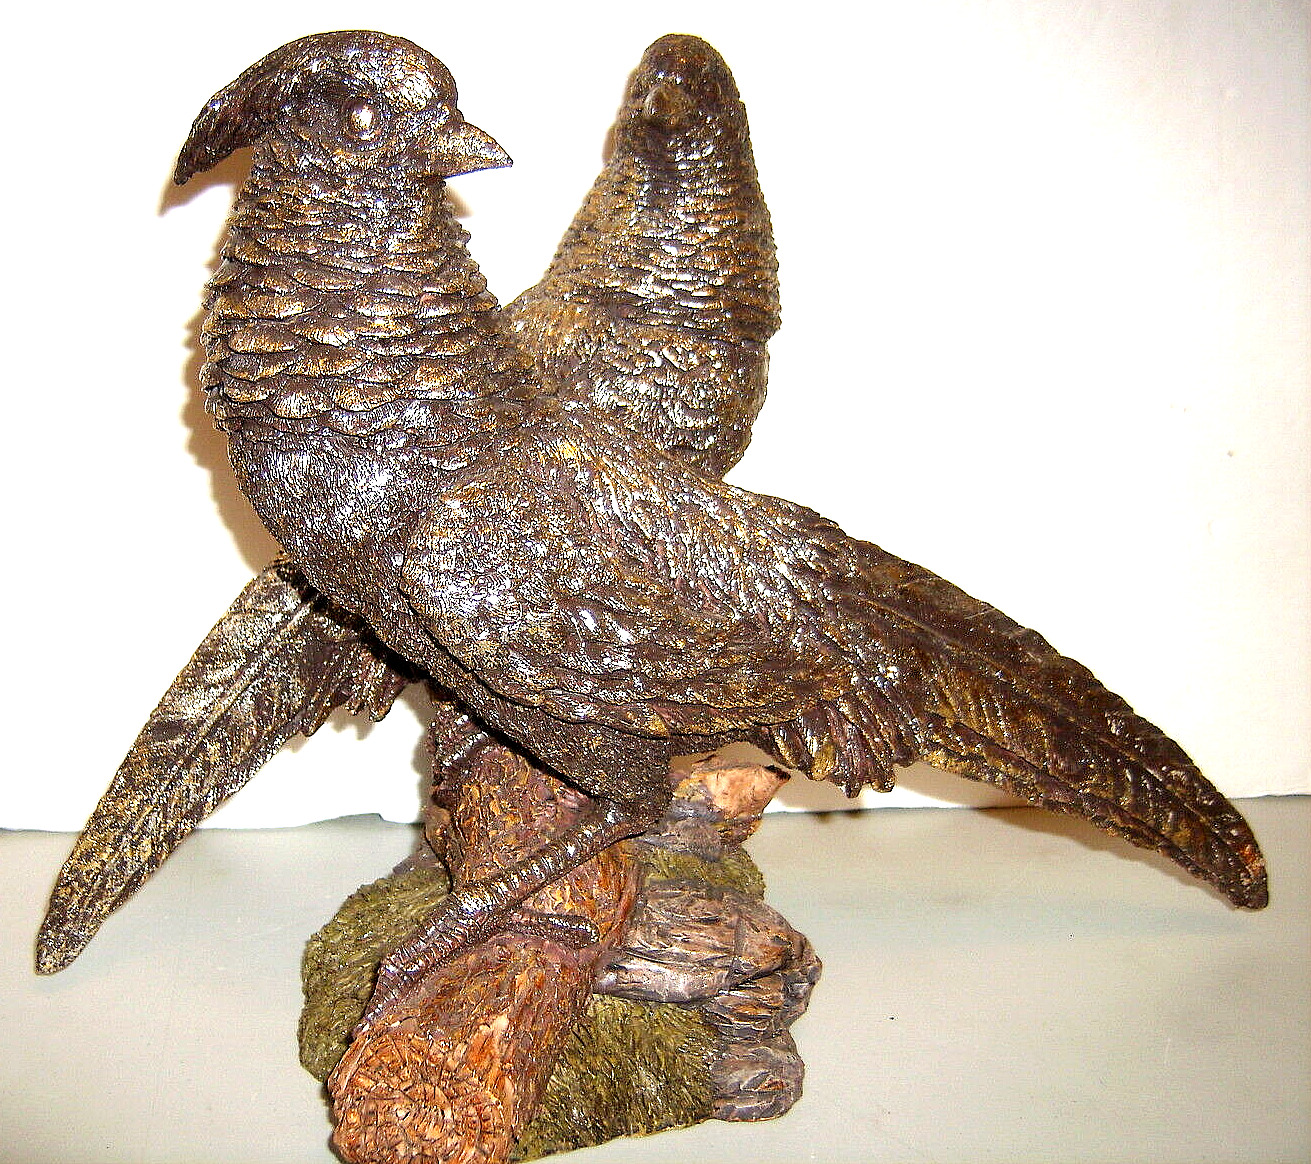 VTg Large Pair of Pheasants Figurine Gold Trim on Feathers  11\